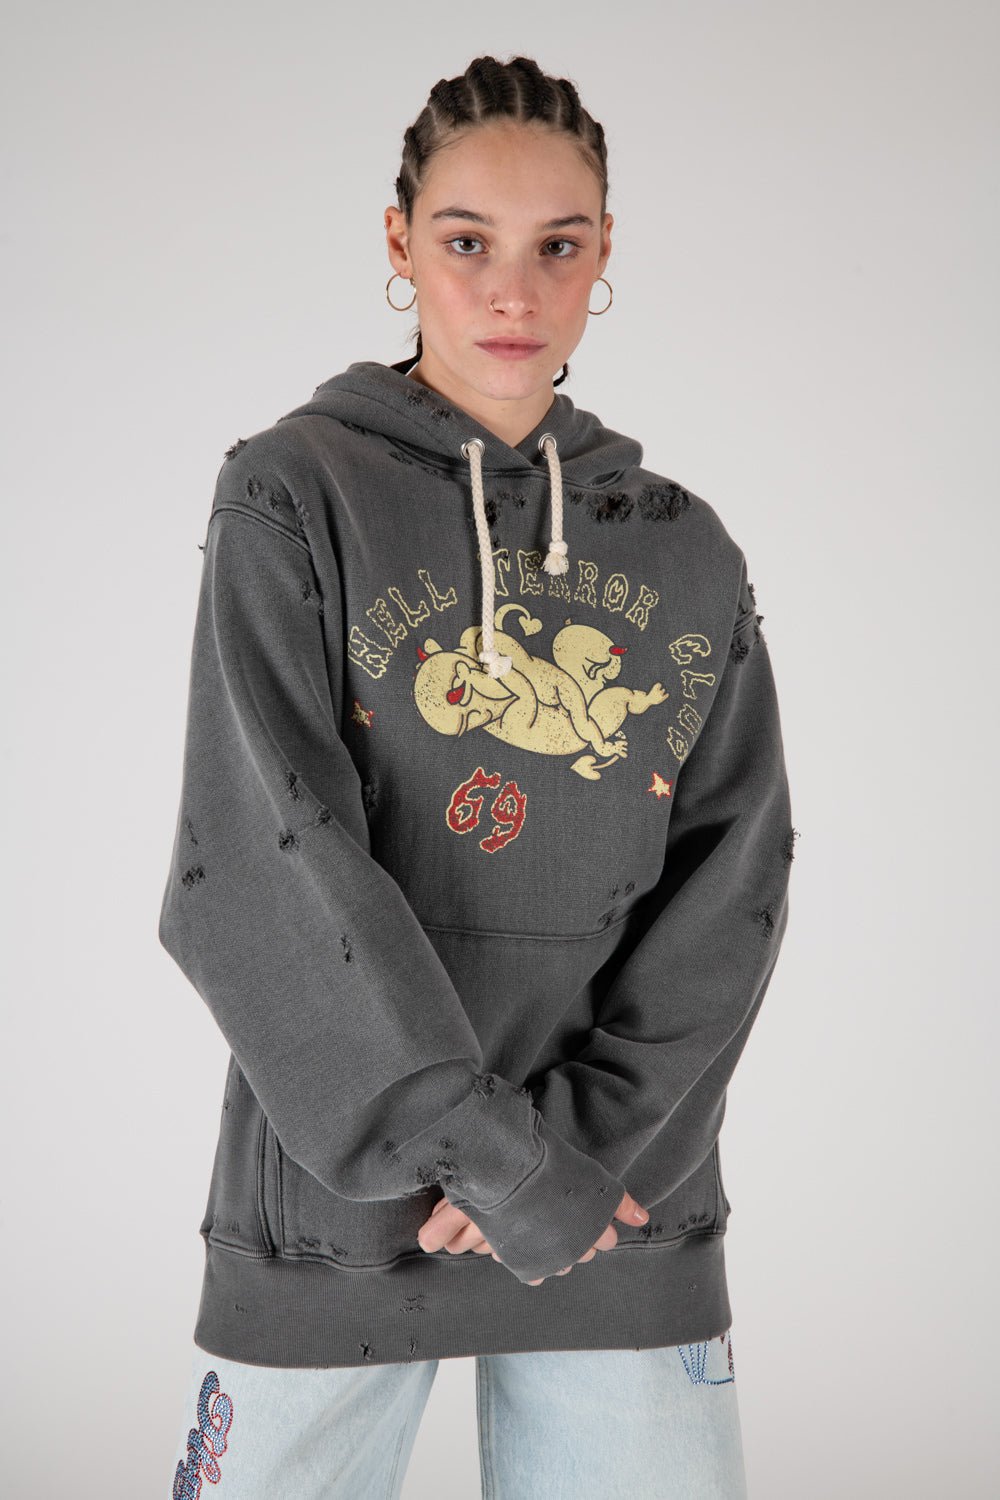 MY HOOD - DEVILS HTC devils' print distressed hoodie. Hood with drawstring, ribbed cuffs and hem. One front kangaroo pocket. Intentionally distressed areas may vary. Composition: 100% Cotton HTC LOS ANGELES